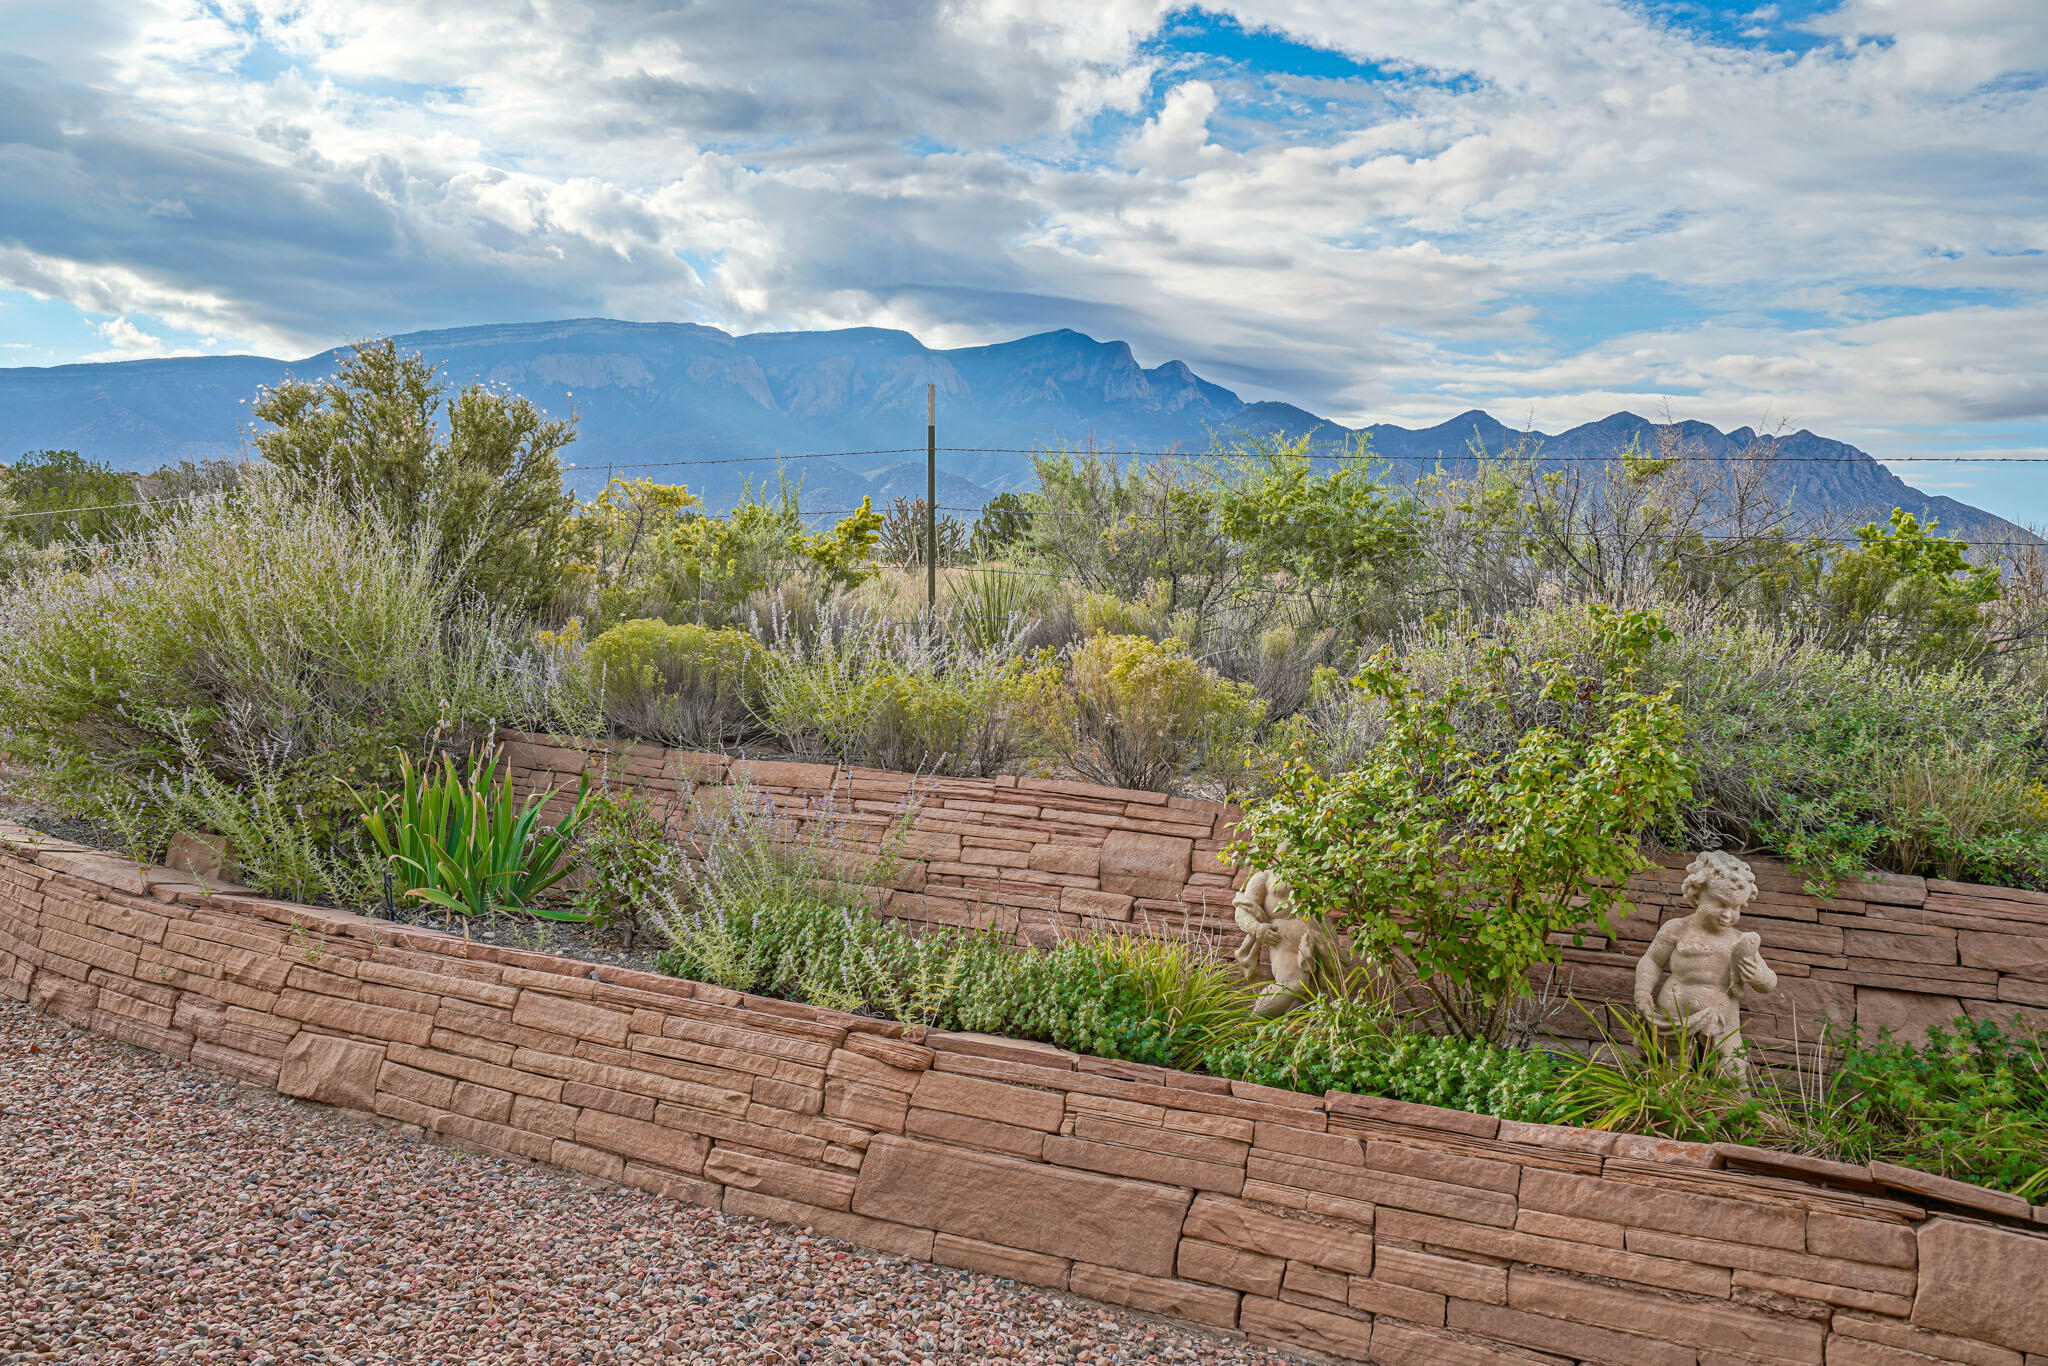 The Ultimate in luxury, Custom designed for the property to capture the huge unobstructed Sandia Views. Complete privacy abutting the Sandia Pueblo. Ultimate quiet, energy efficiency & secure feel with Straw Bale construction. The home was designed around a collection of Antique doors including Ziwan doors leading into the courtyard collected from all parts of NM. Handmade wooden cabinetry, antique vanities, stamped concrete flooring throughout & radiant heat to warm your toes. An architectural treasure. Standing in the generous entry hall fireplaces are mirrored at each end of the halls creating a visually pleasing reflection of each other. The sunroom windows open a large expanse bringing the outdoors inside. Each guest suite includes a kiva fireplace, private bath, & sitting area.